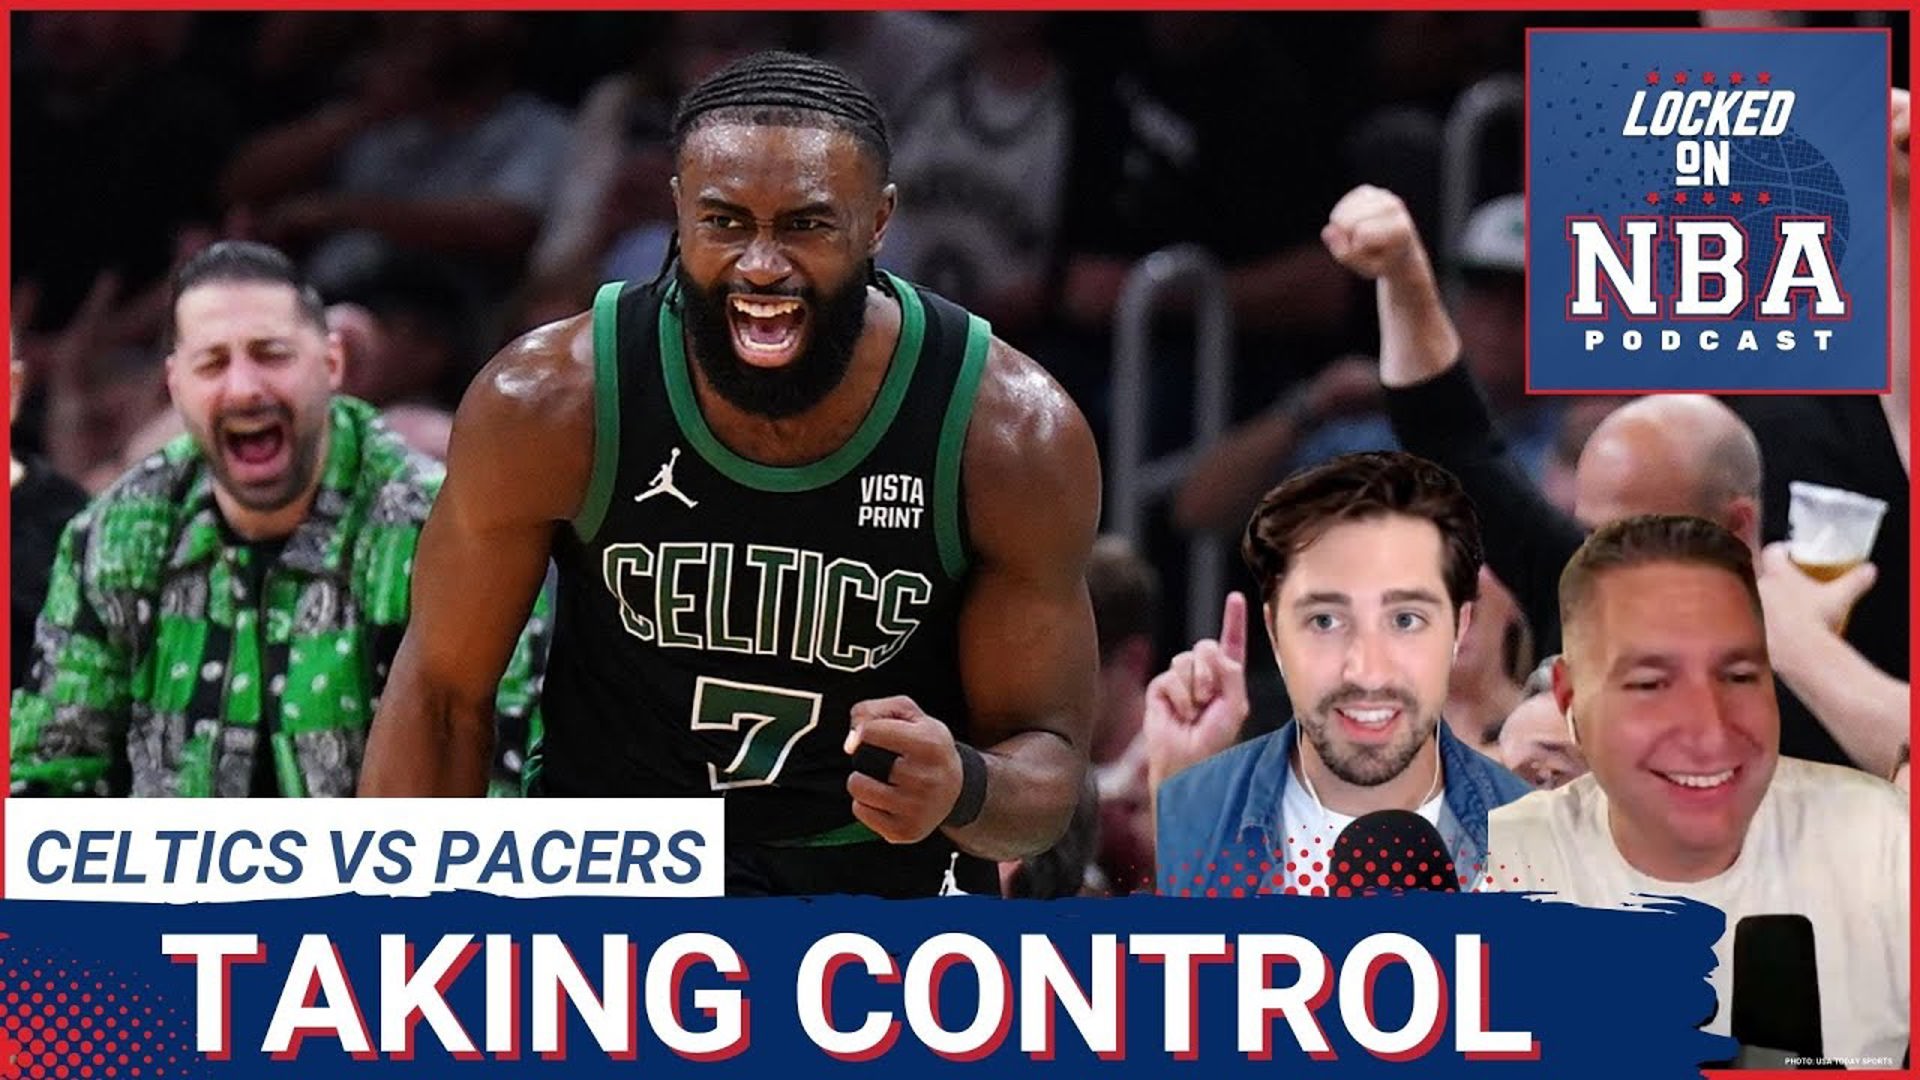 The Celtics dominated the Pacers in Game 2, but have they taken control of the series? Wes Goldberg and Adam Mares discuss.